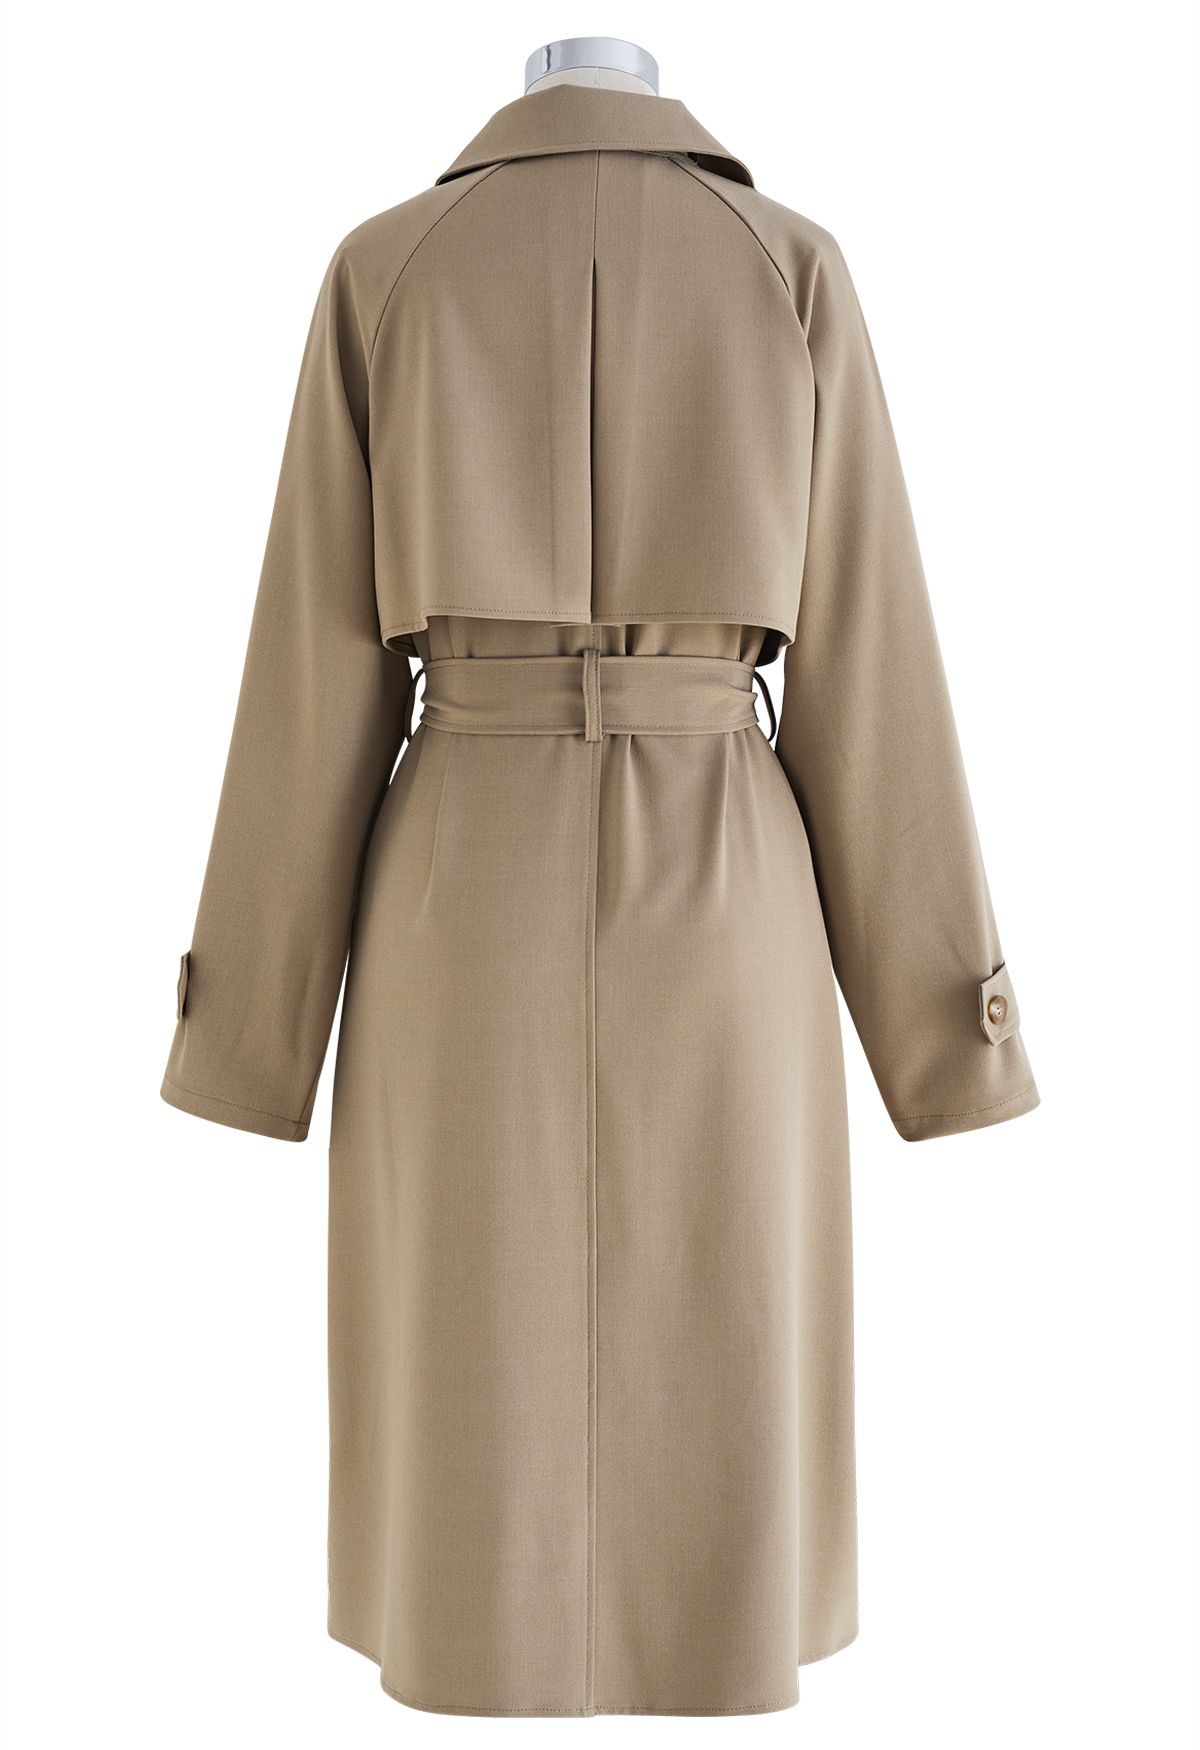 Single-Breasted Belted Trench Coat in Camel